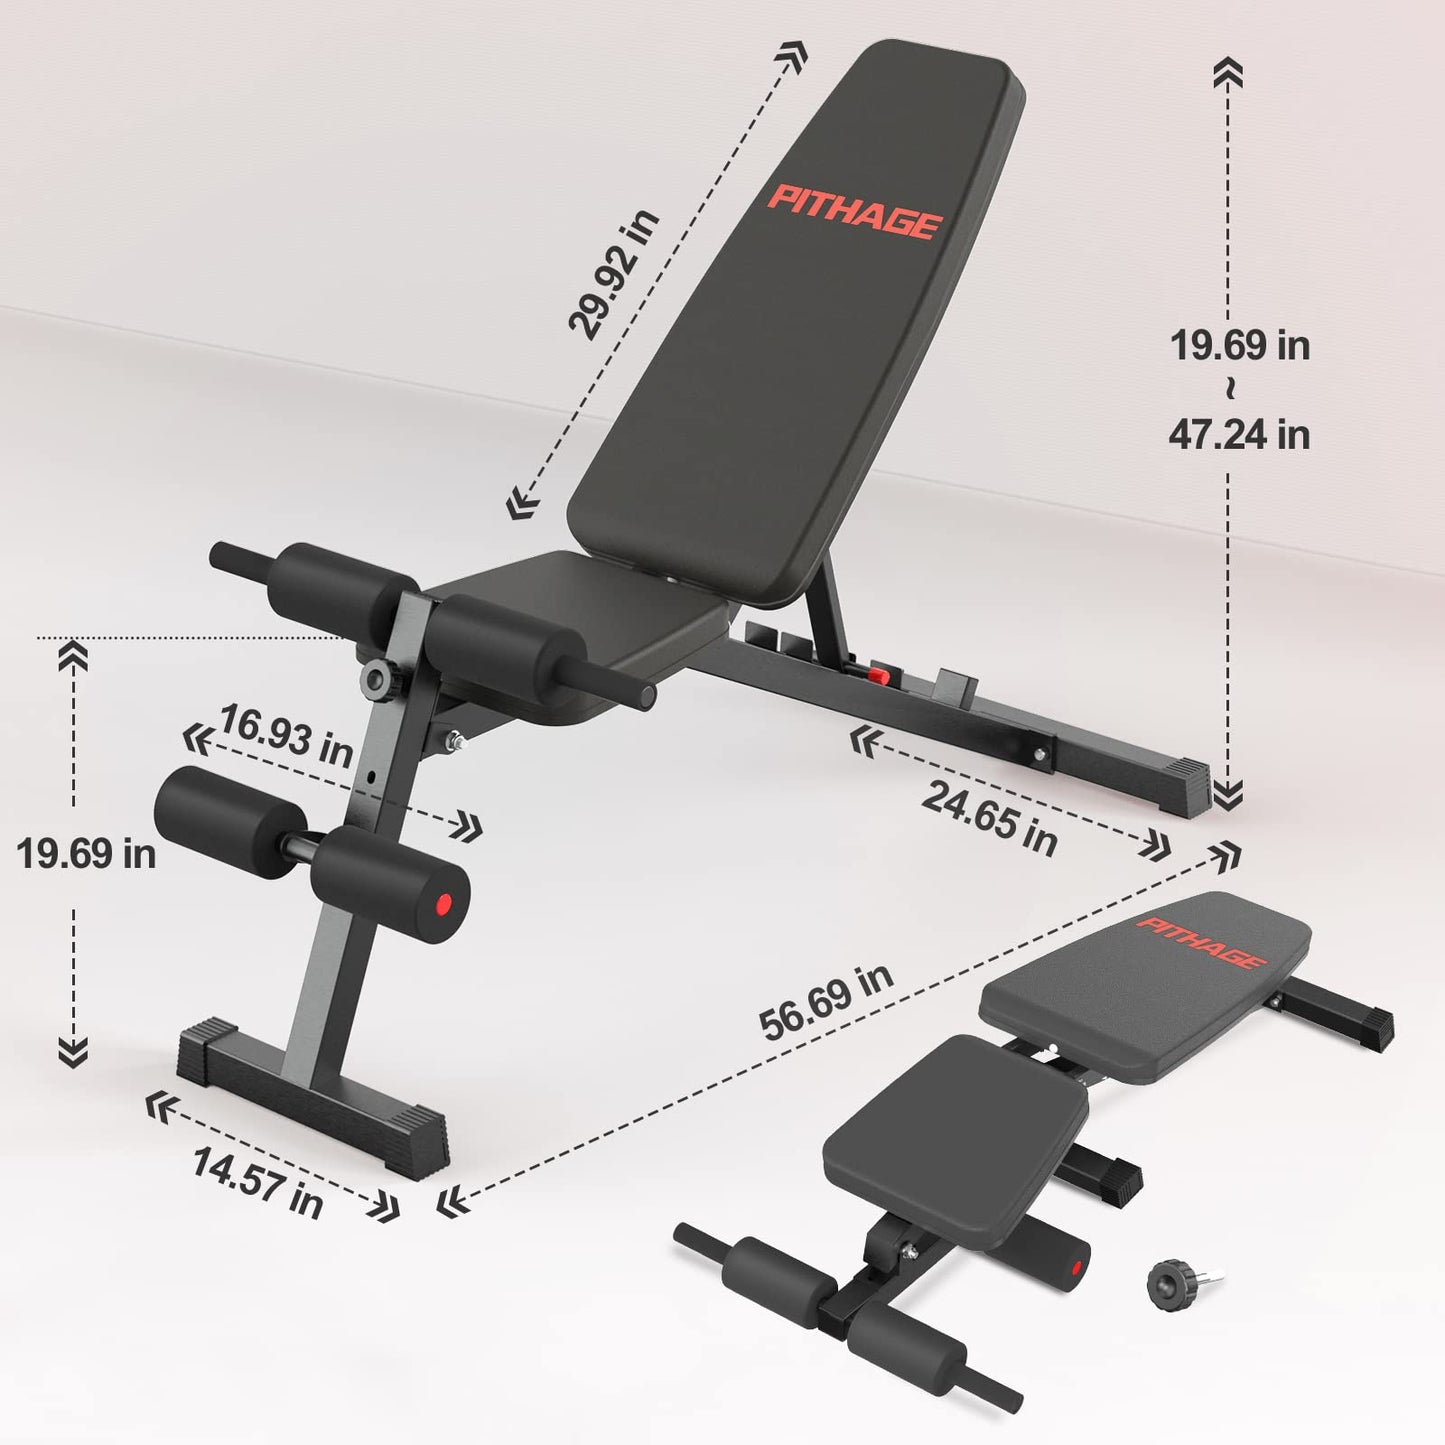 660 LBS PITHAGE Adjustable Weight Bench